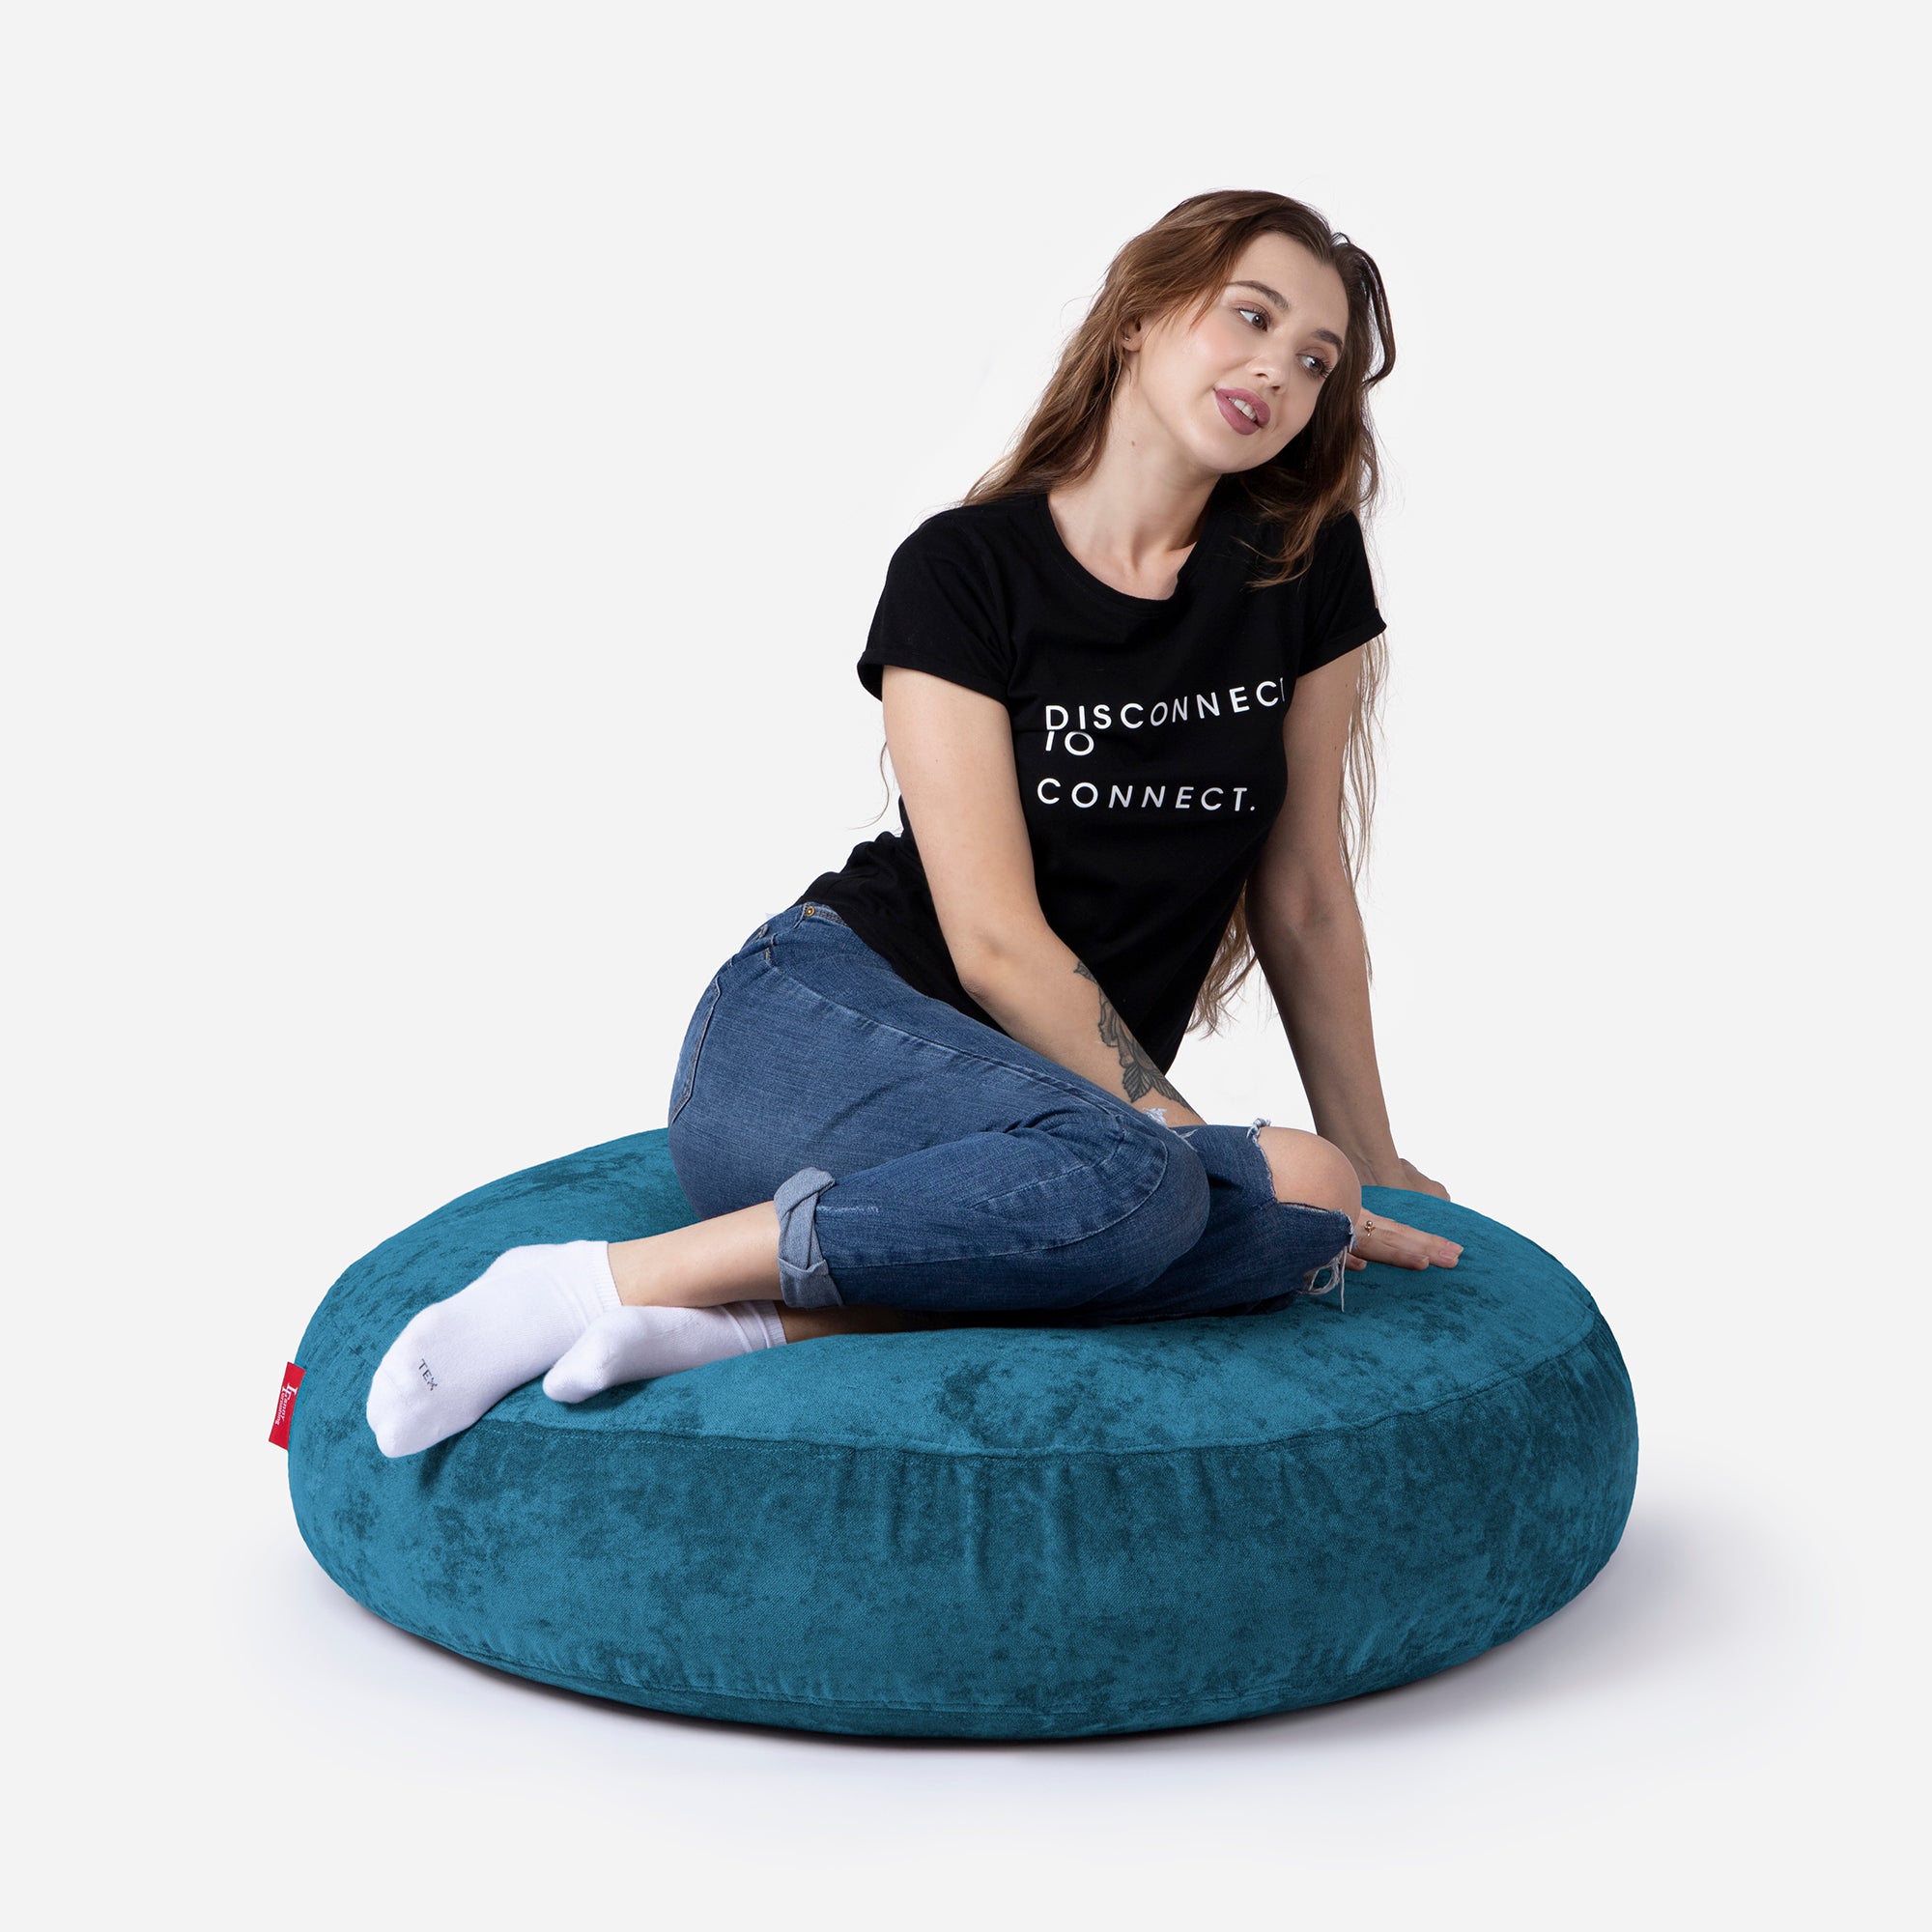 Pouf, Ottoman aqua color by Lanny with girl seating on it 